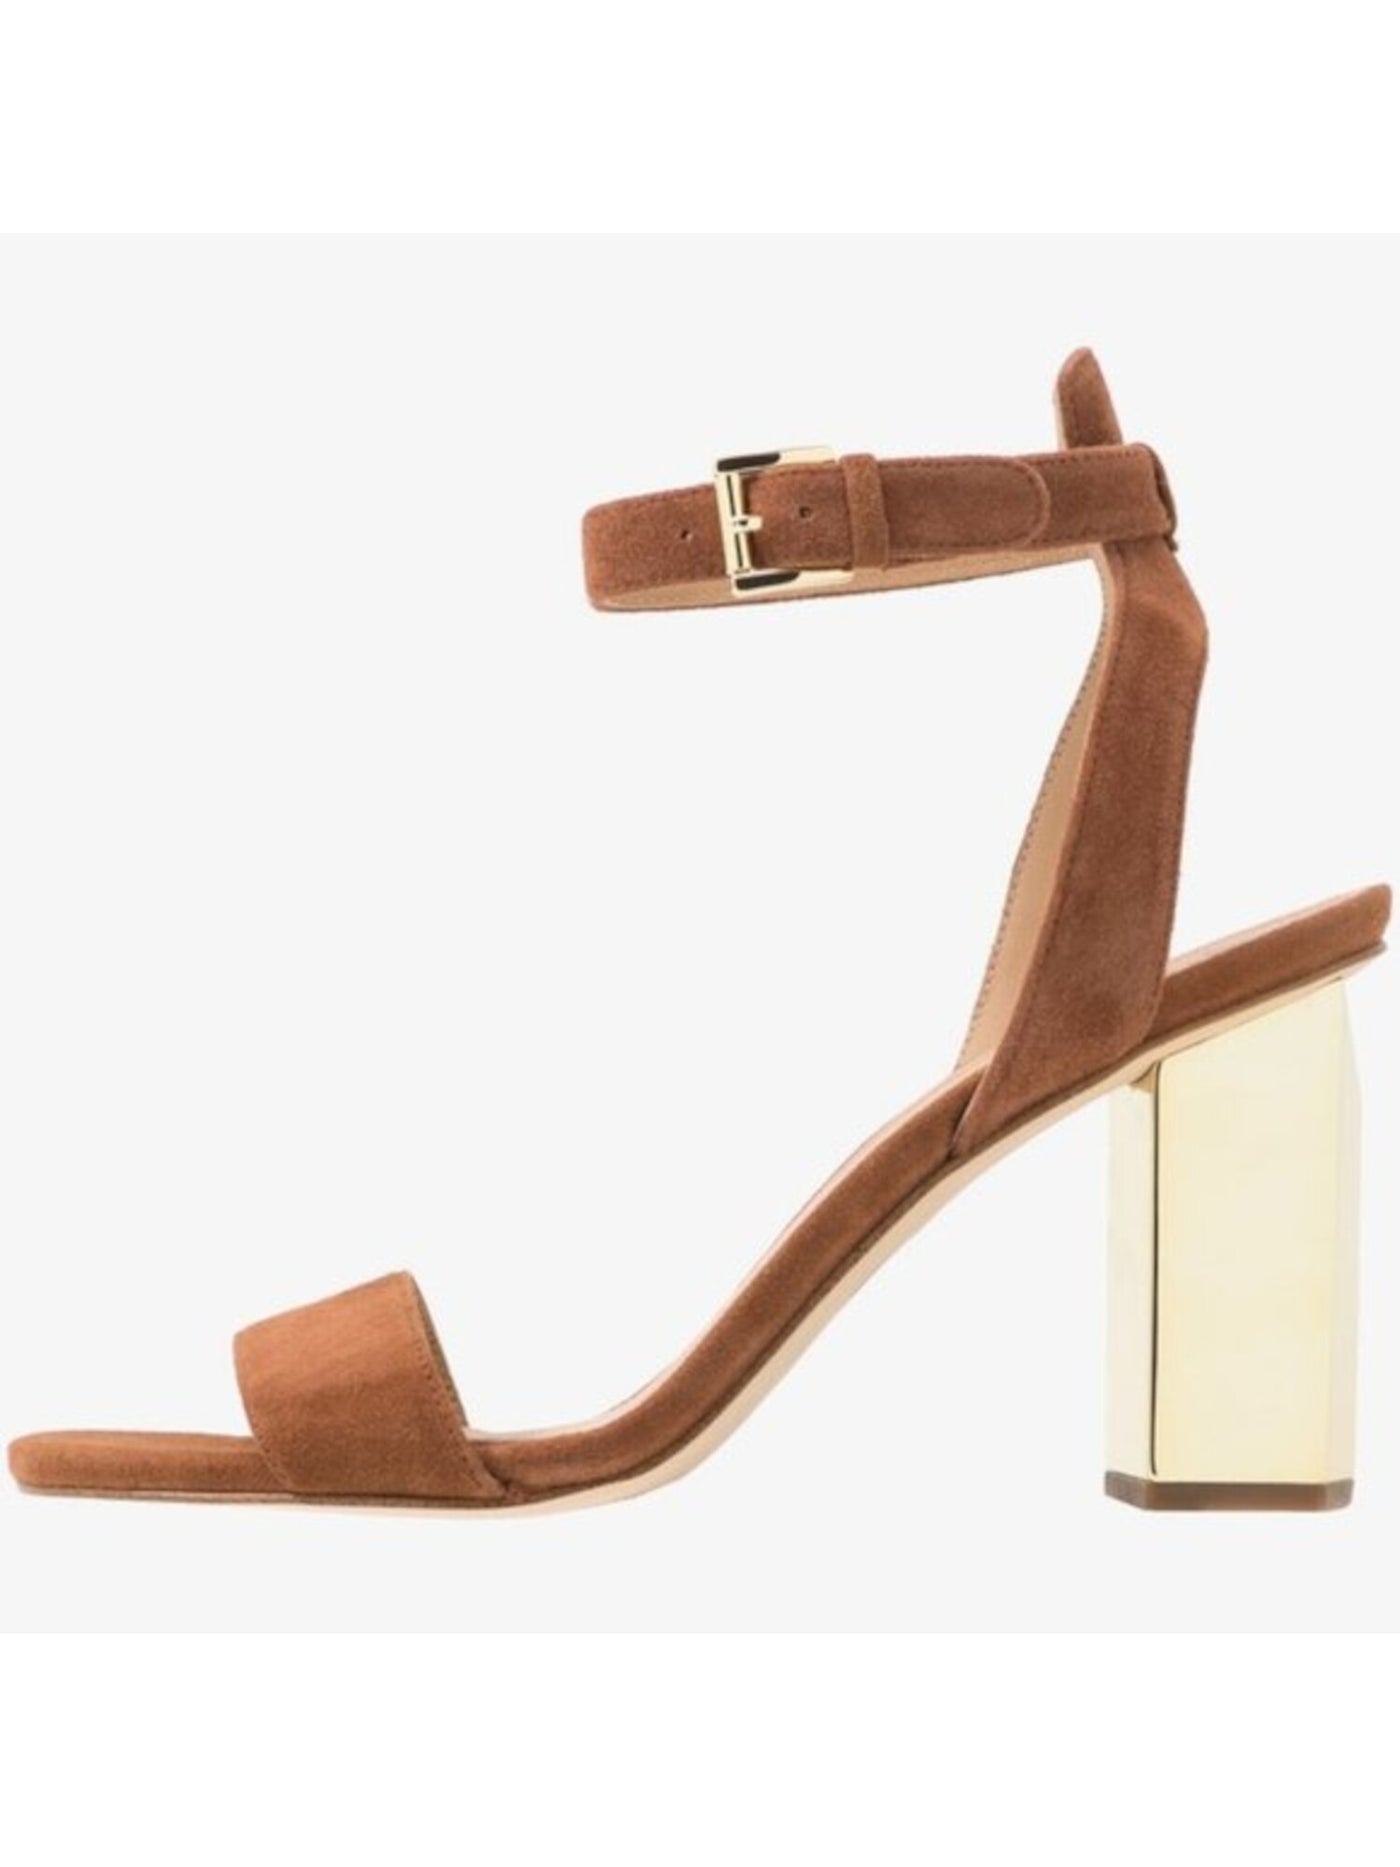 MICHAEL KORS Womens Luggage Brown Mirrored Designer Heel Ankle Strap Cushioned Petra Square Toe Buckle Leather Dress Sandals Shoes M